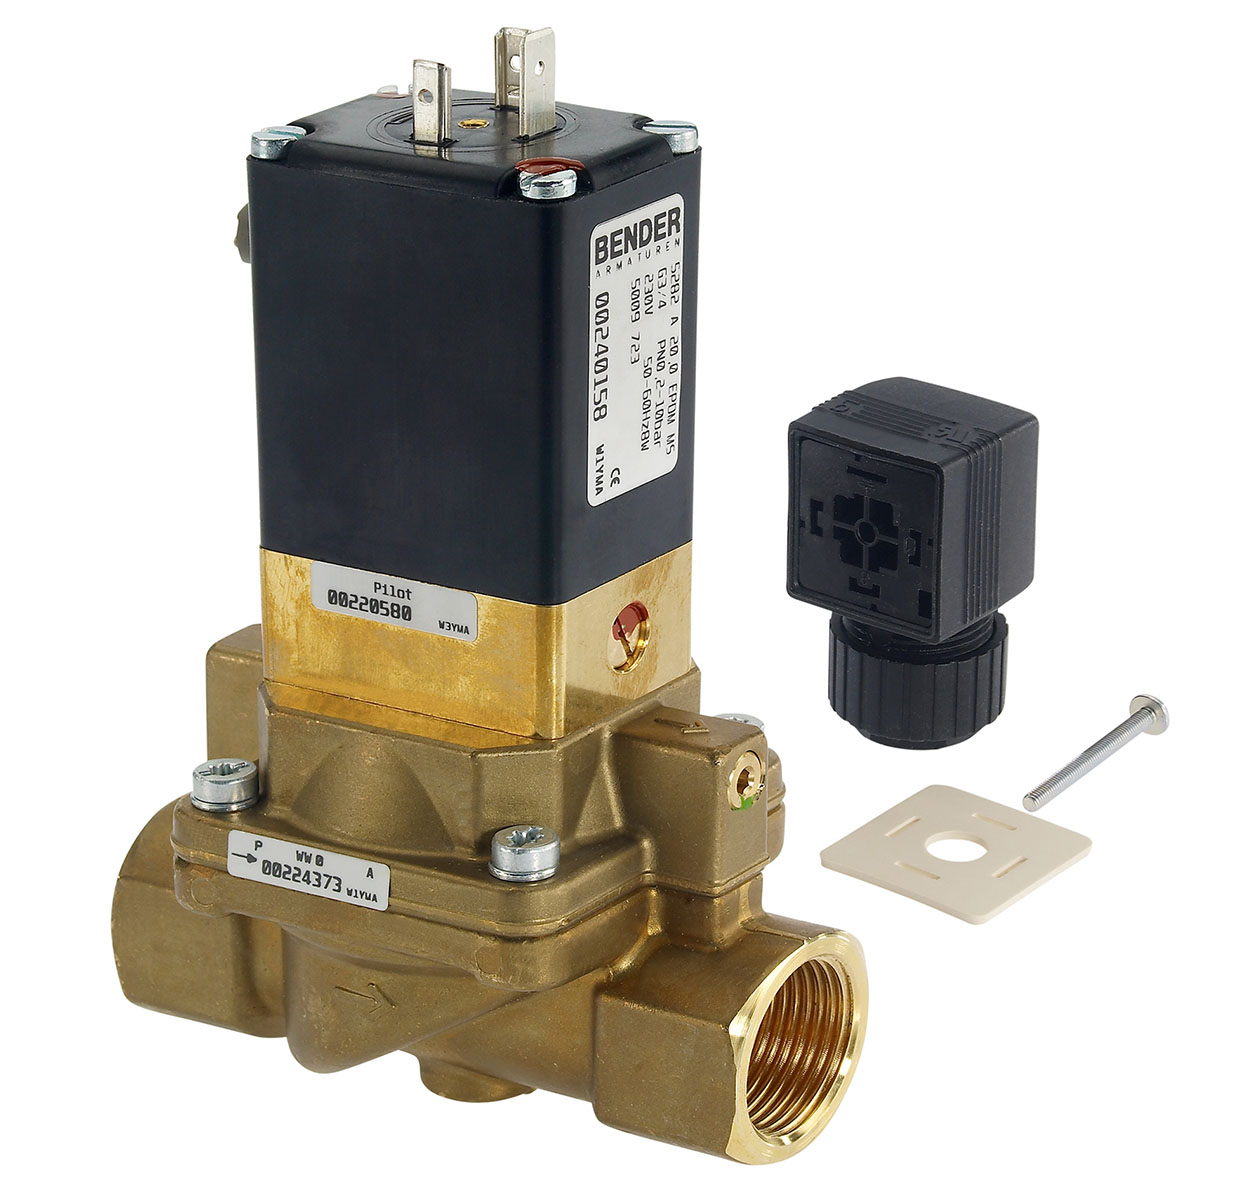 5009736 - 2/2 way solenoid valve normally closed for lightly soiled fluids Type 7; female thread